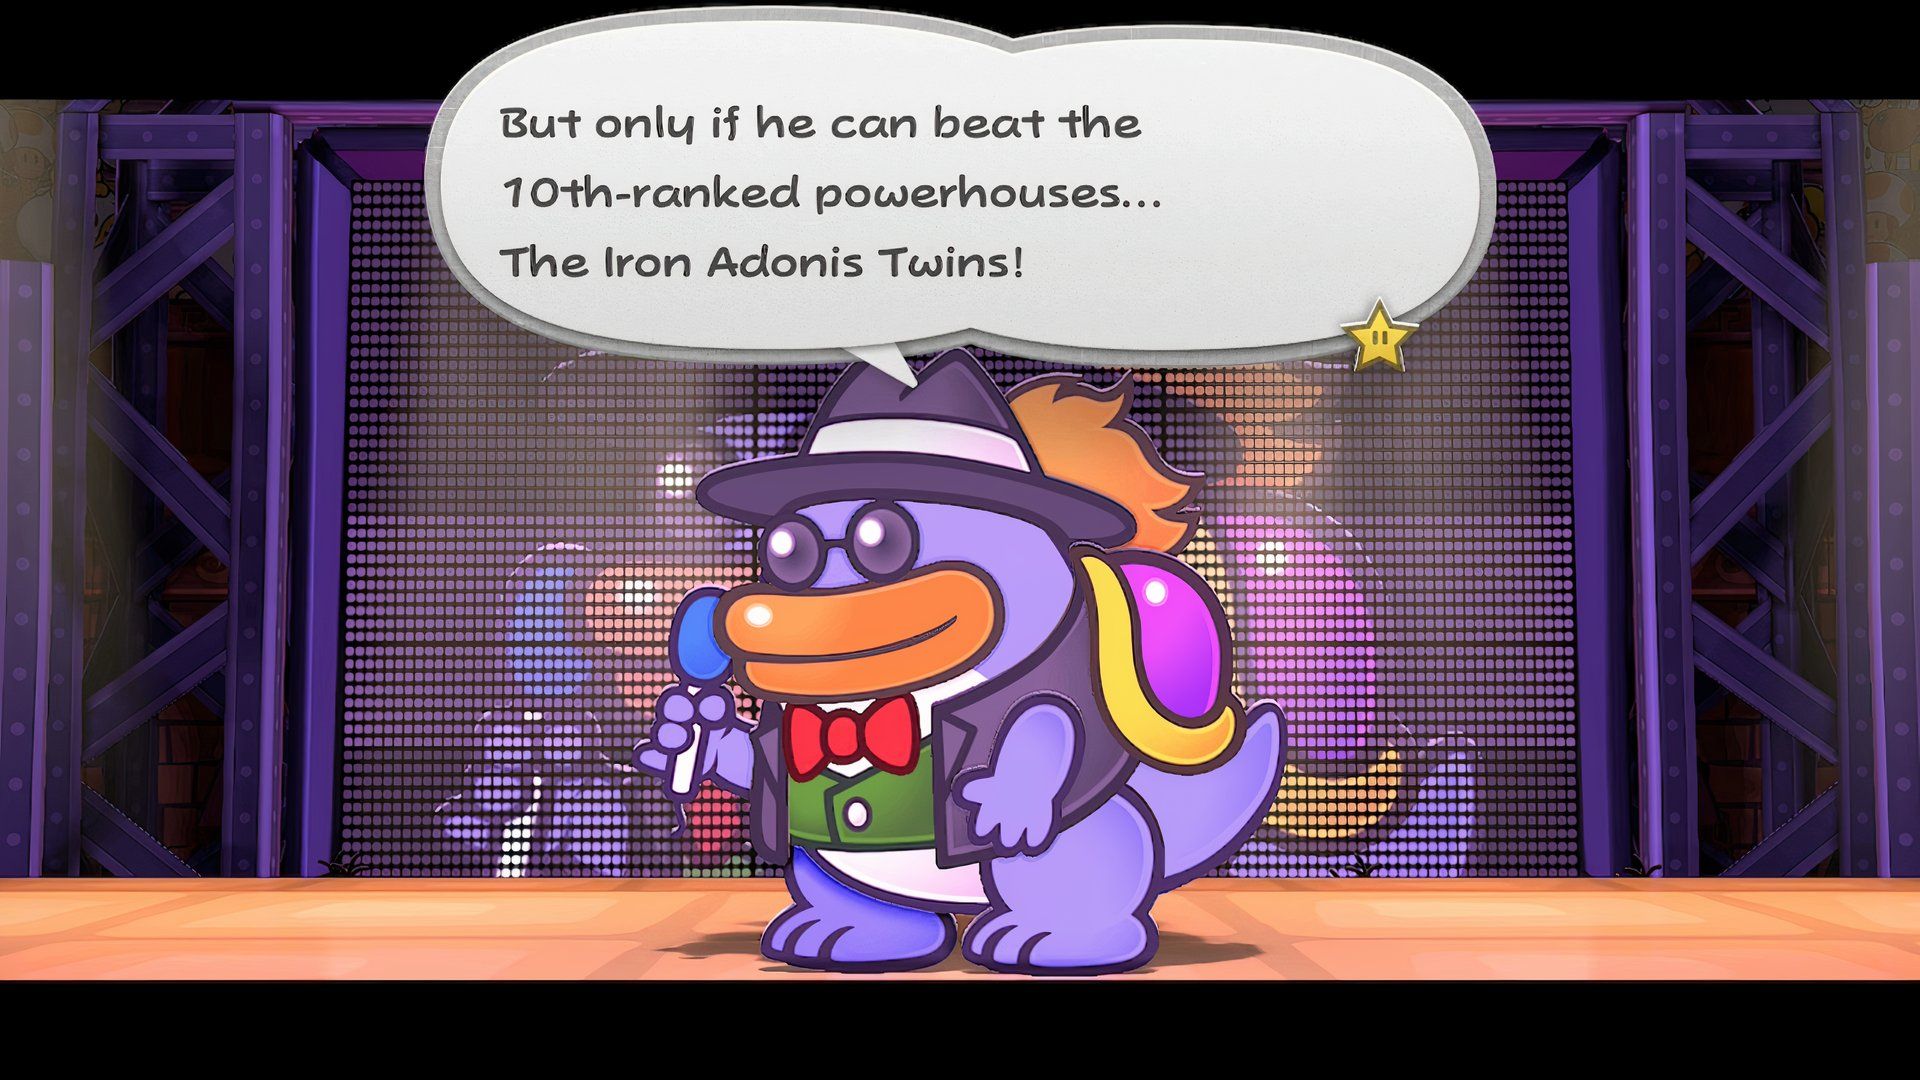 Paper Mario: The Thousand-Year Door - Grubba announces the Iron Adonis Twins in the Glitz Pit